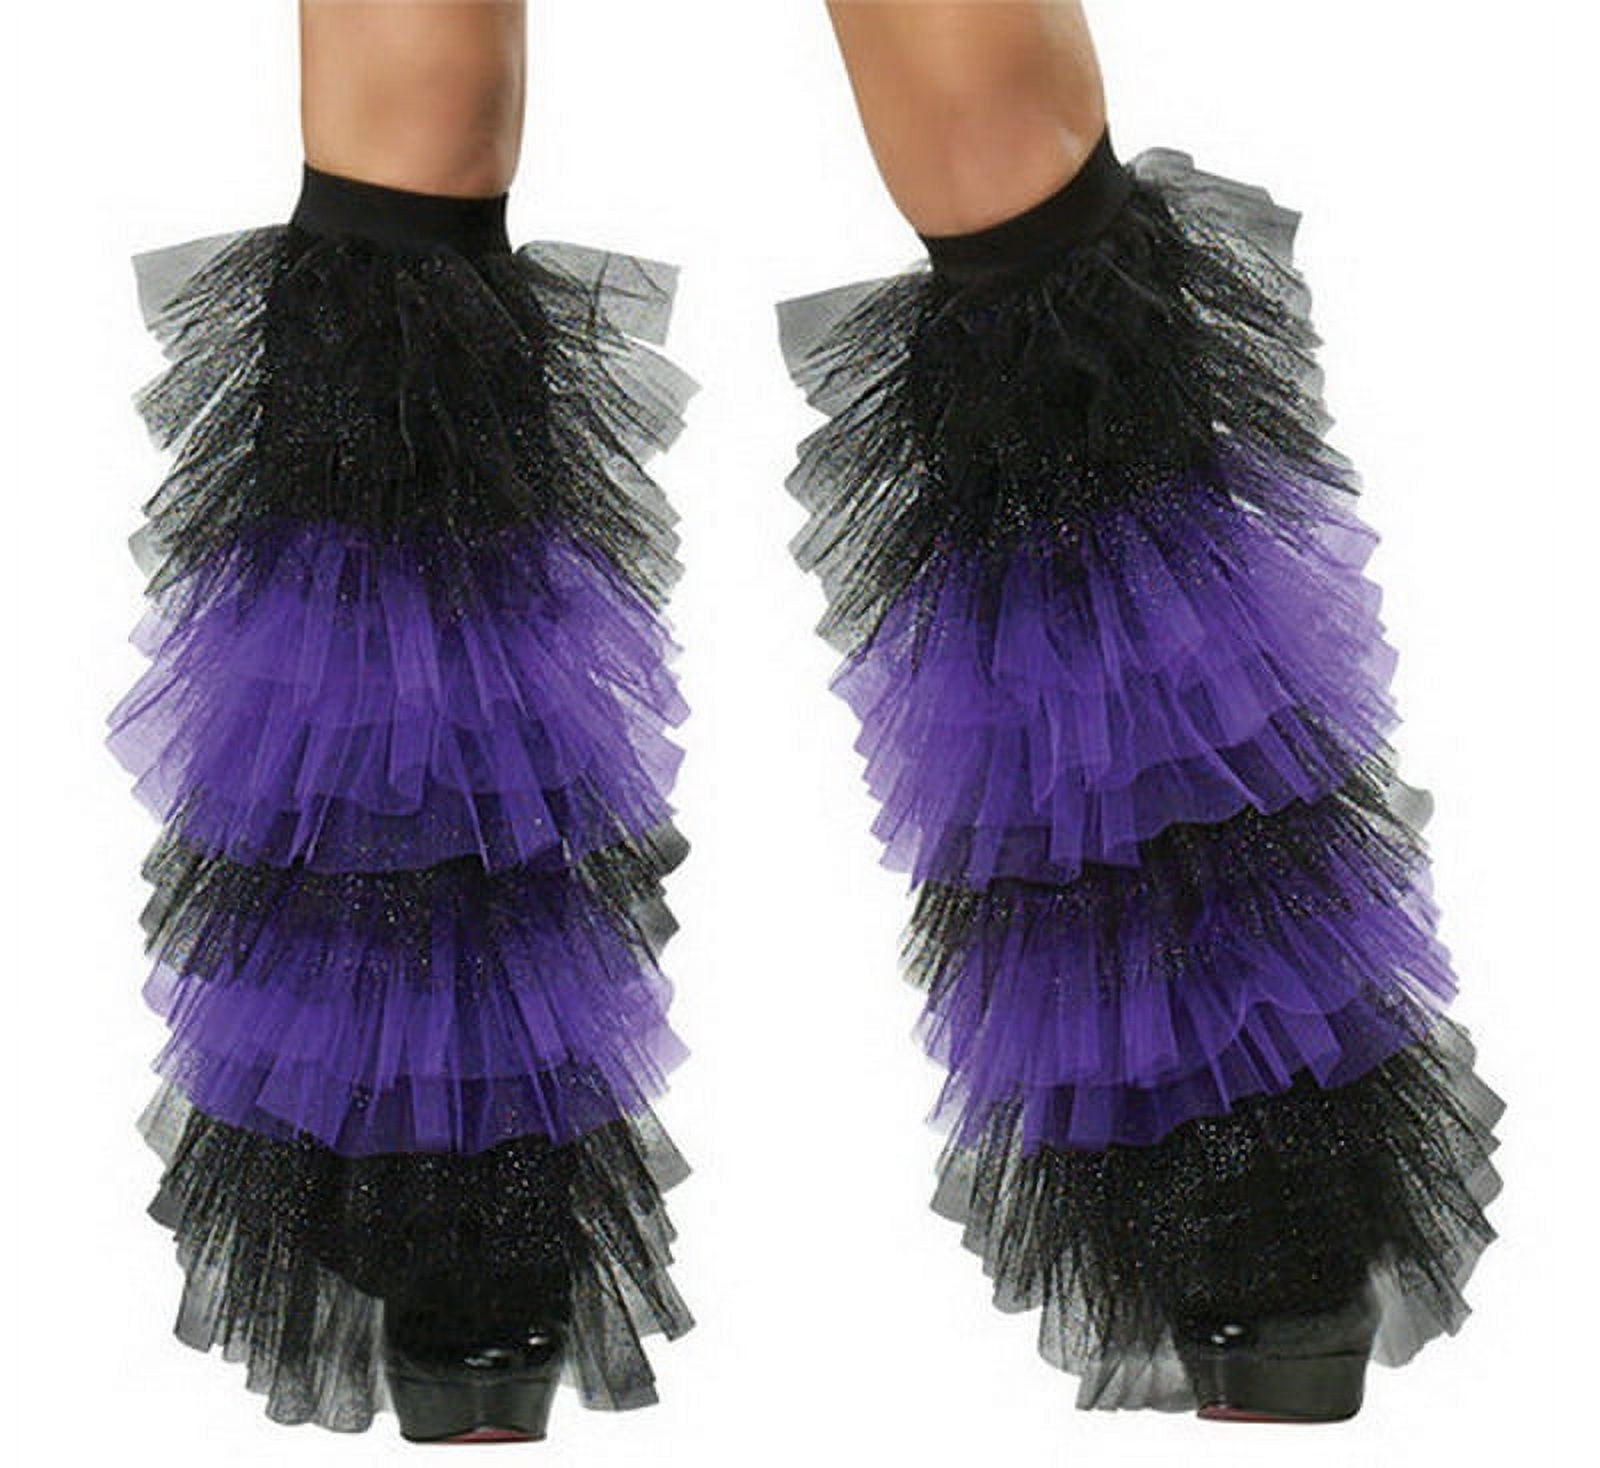 Ruffle Tulle Boot Covers Adult Halloween Accessory - Walmart.com